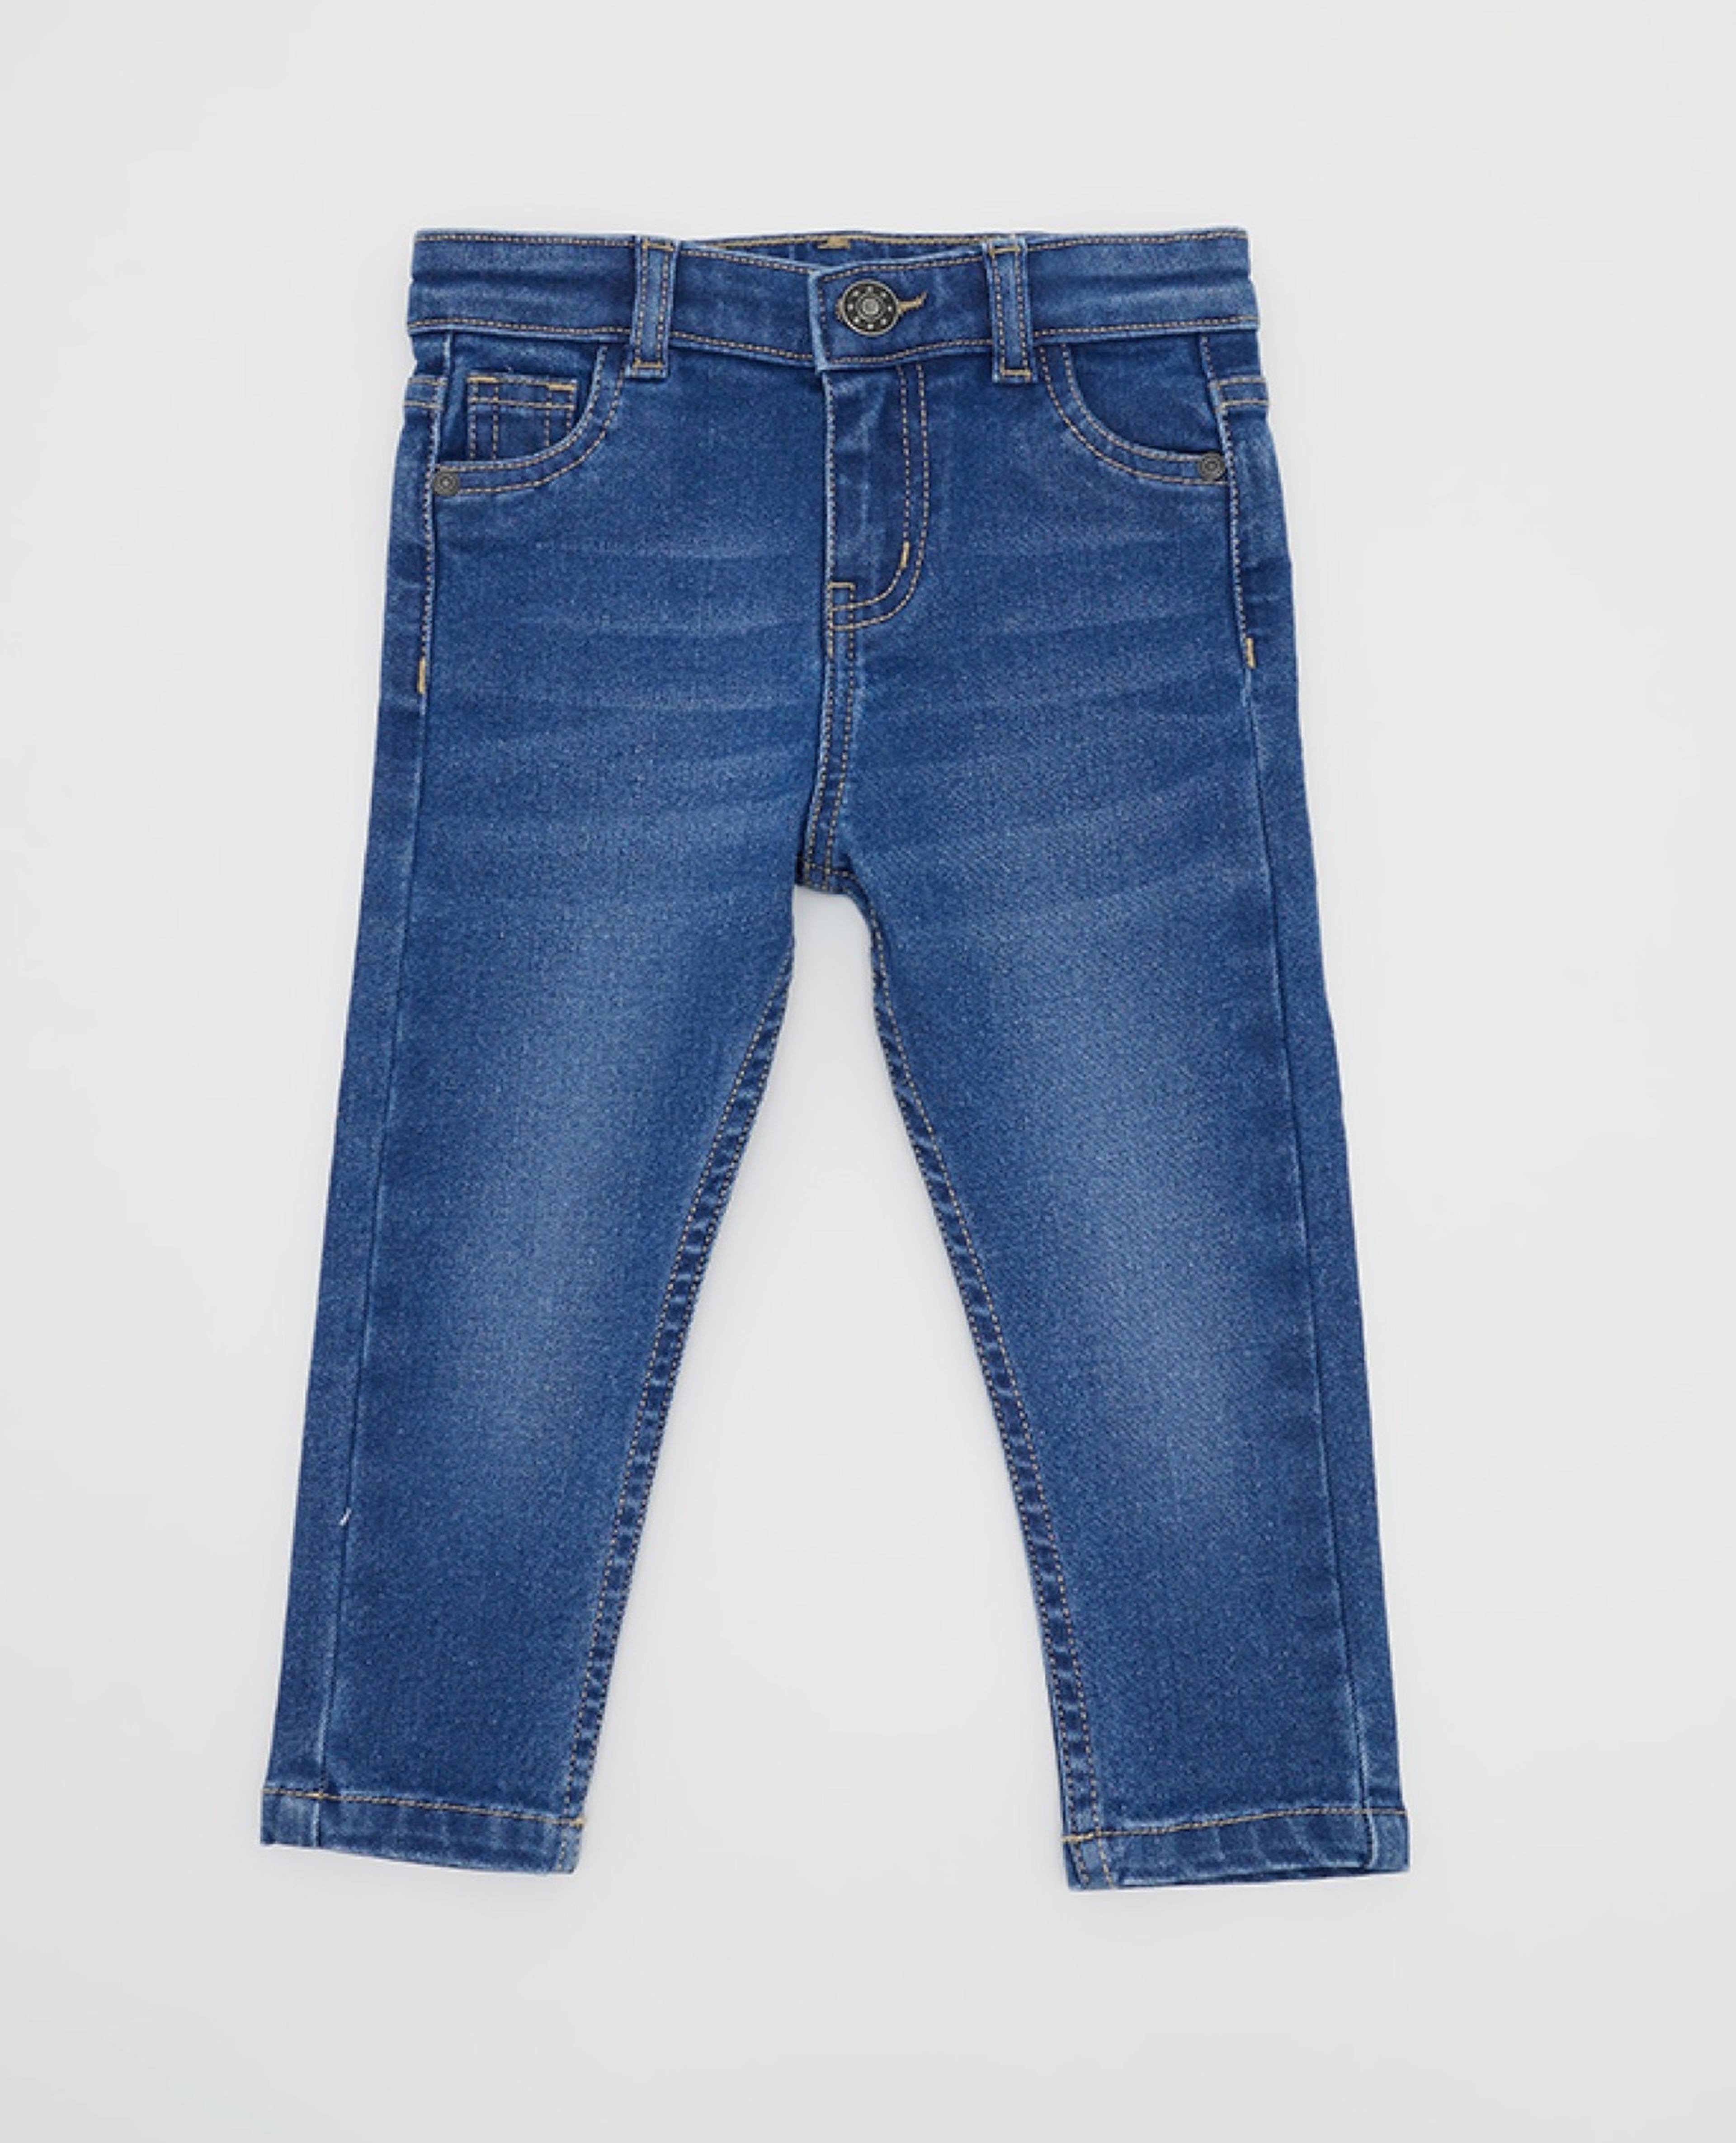 R&B Kids - Solid 5 Pocket Jeans with Button Closure